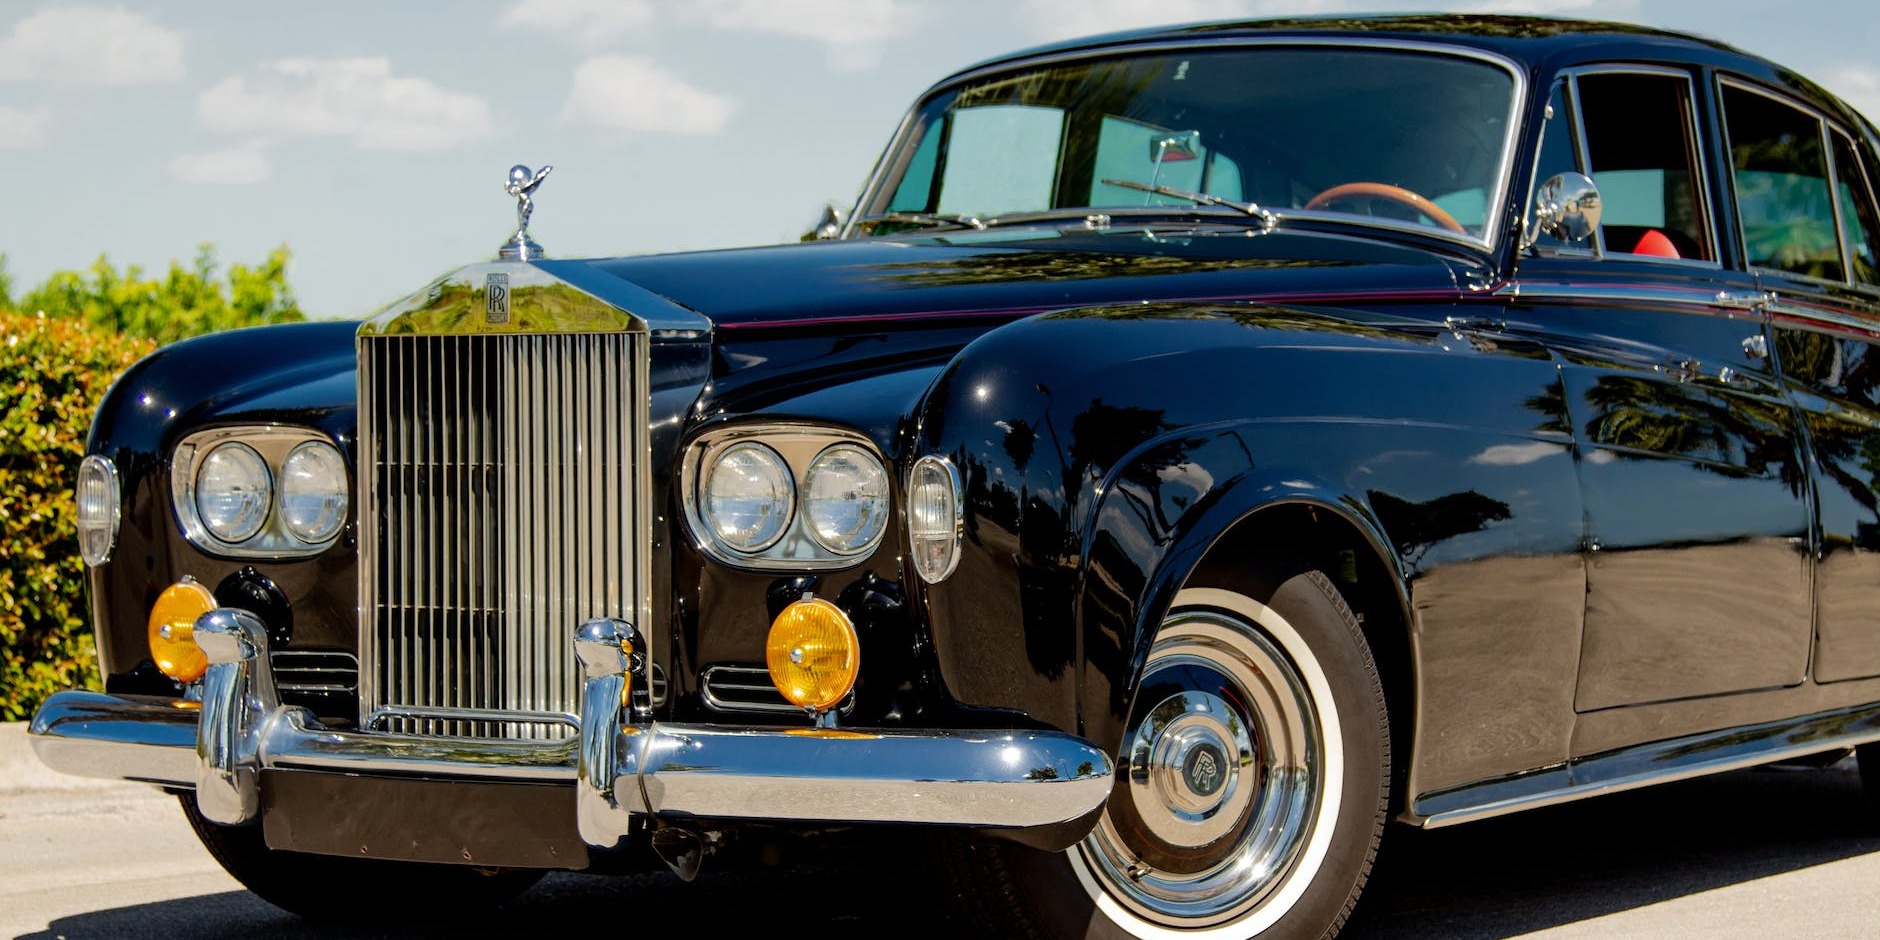 The Top 5 Features of a Rolls Royce That Define Automotive Excellence